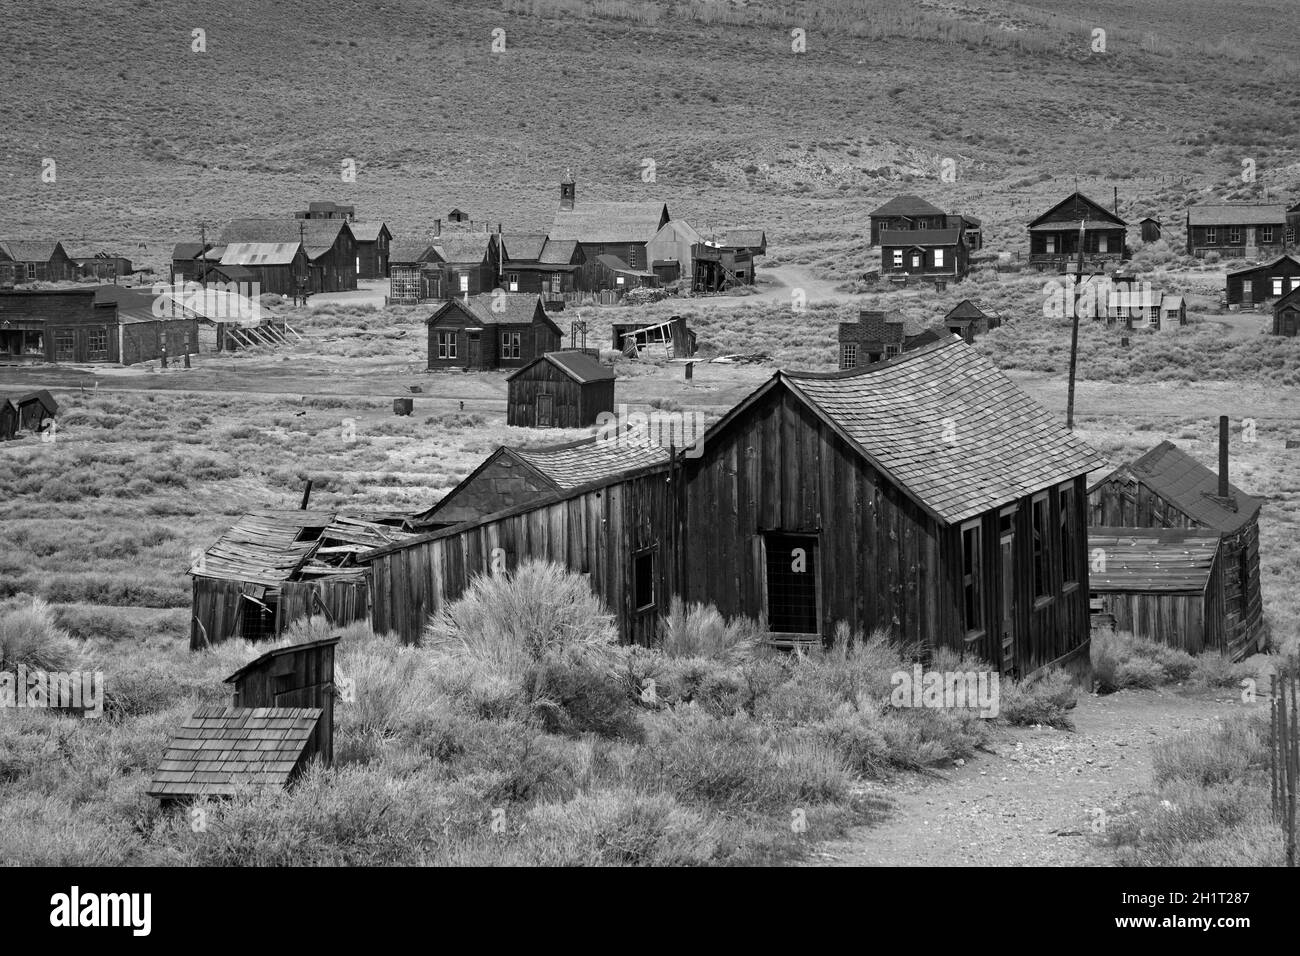 Bodie Ghost Town ( elevation 8379 ft / 2554 m ), Bodie Hills, Mono County, Eastern Sierra, California, USA Stock Photo